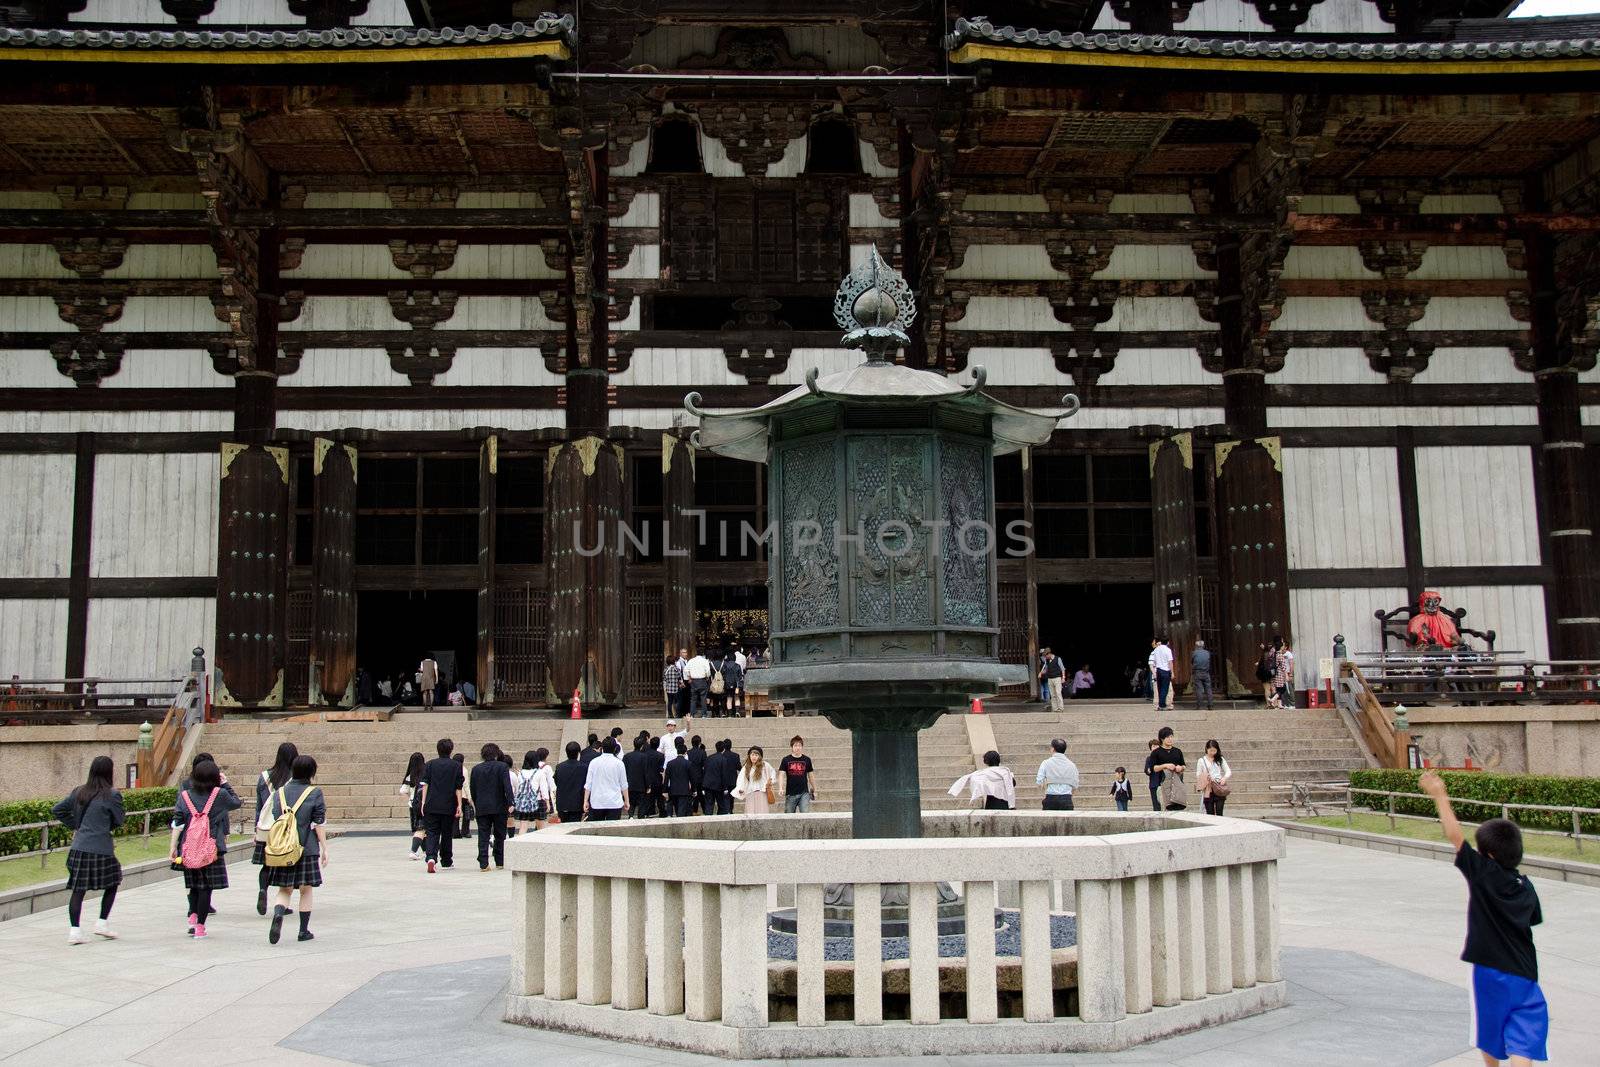 Entrance and lantern of Todai-ji temple by Arrxxx